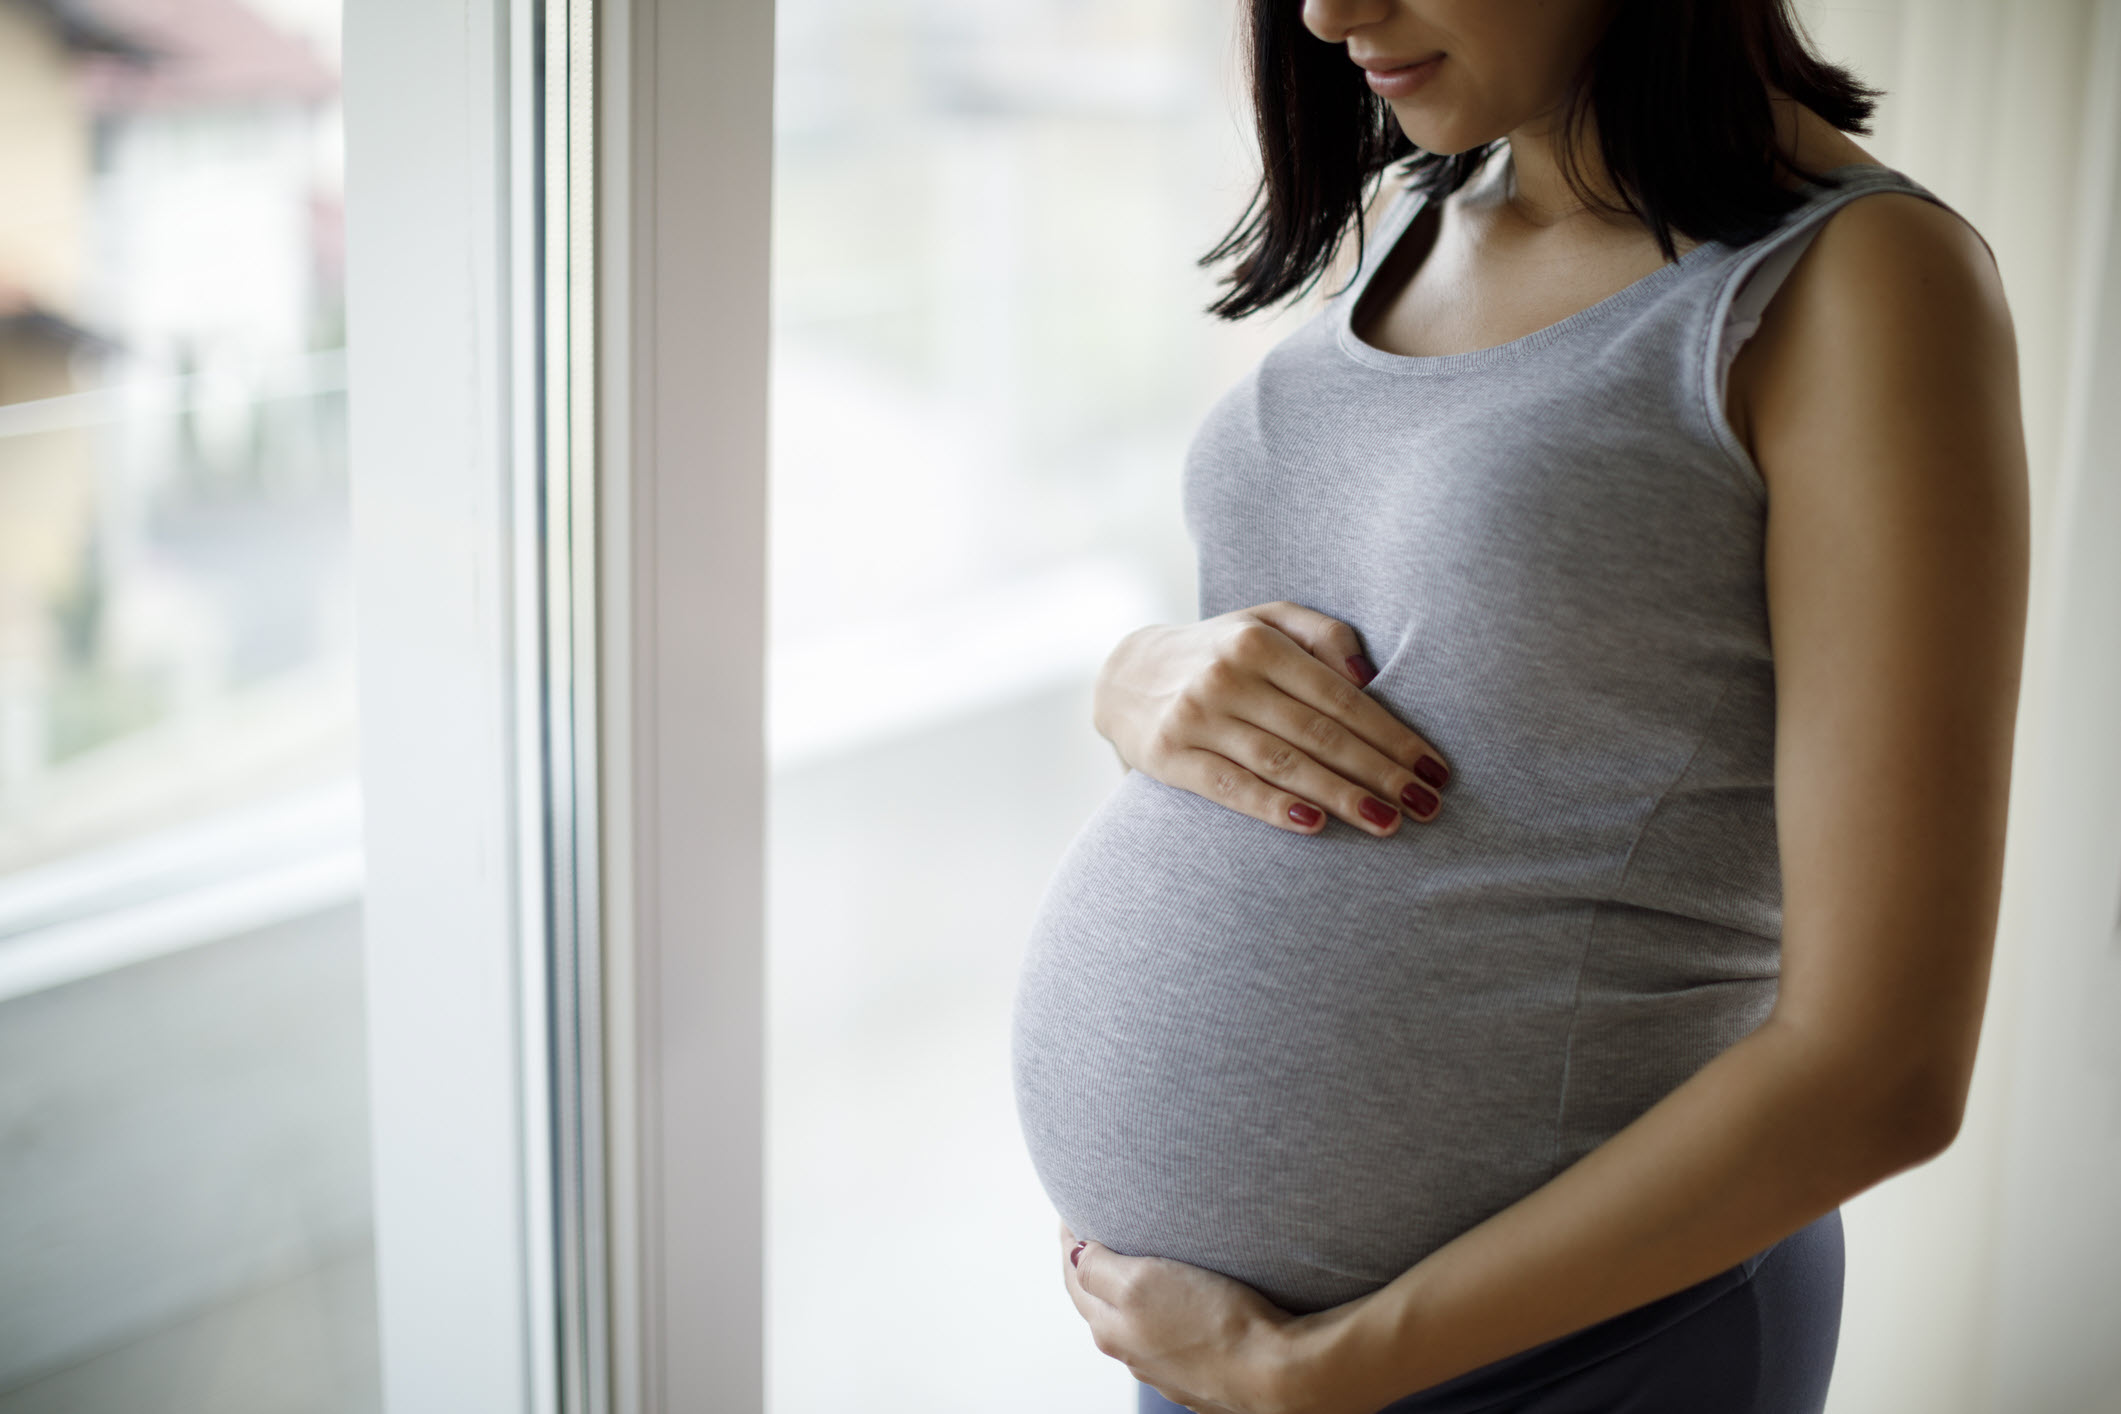 Bariatric Surgery After Pregnancy: What Should I Know? | VIDA Bariatrics